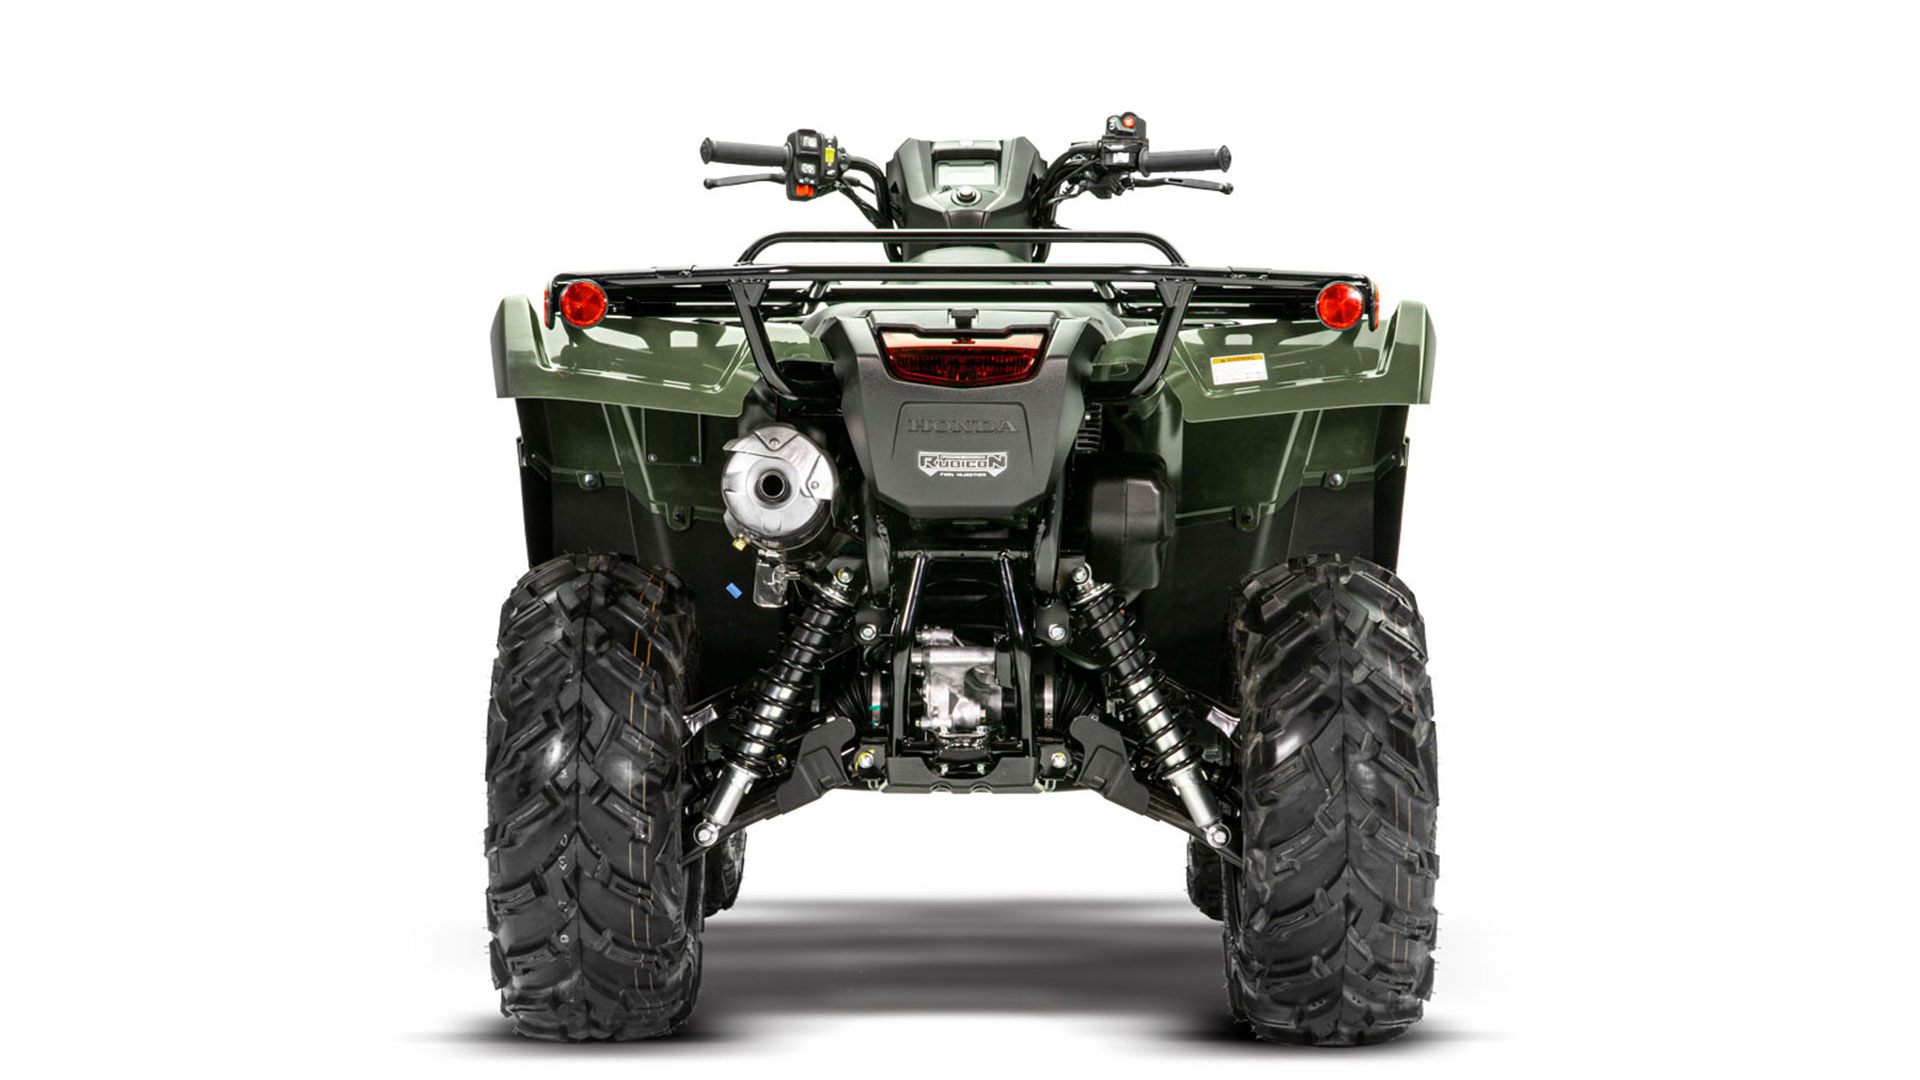 TRX520_Rubicon_DCT_IRS_EPS_Gallery5 Moto Sport 100 limites